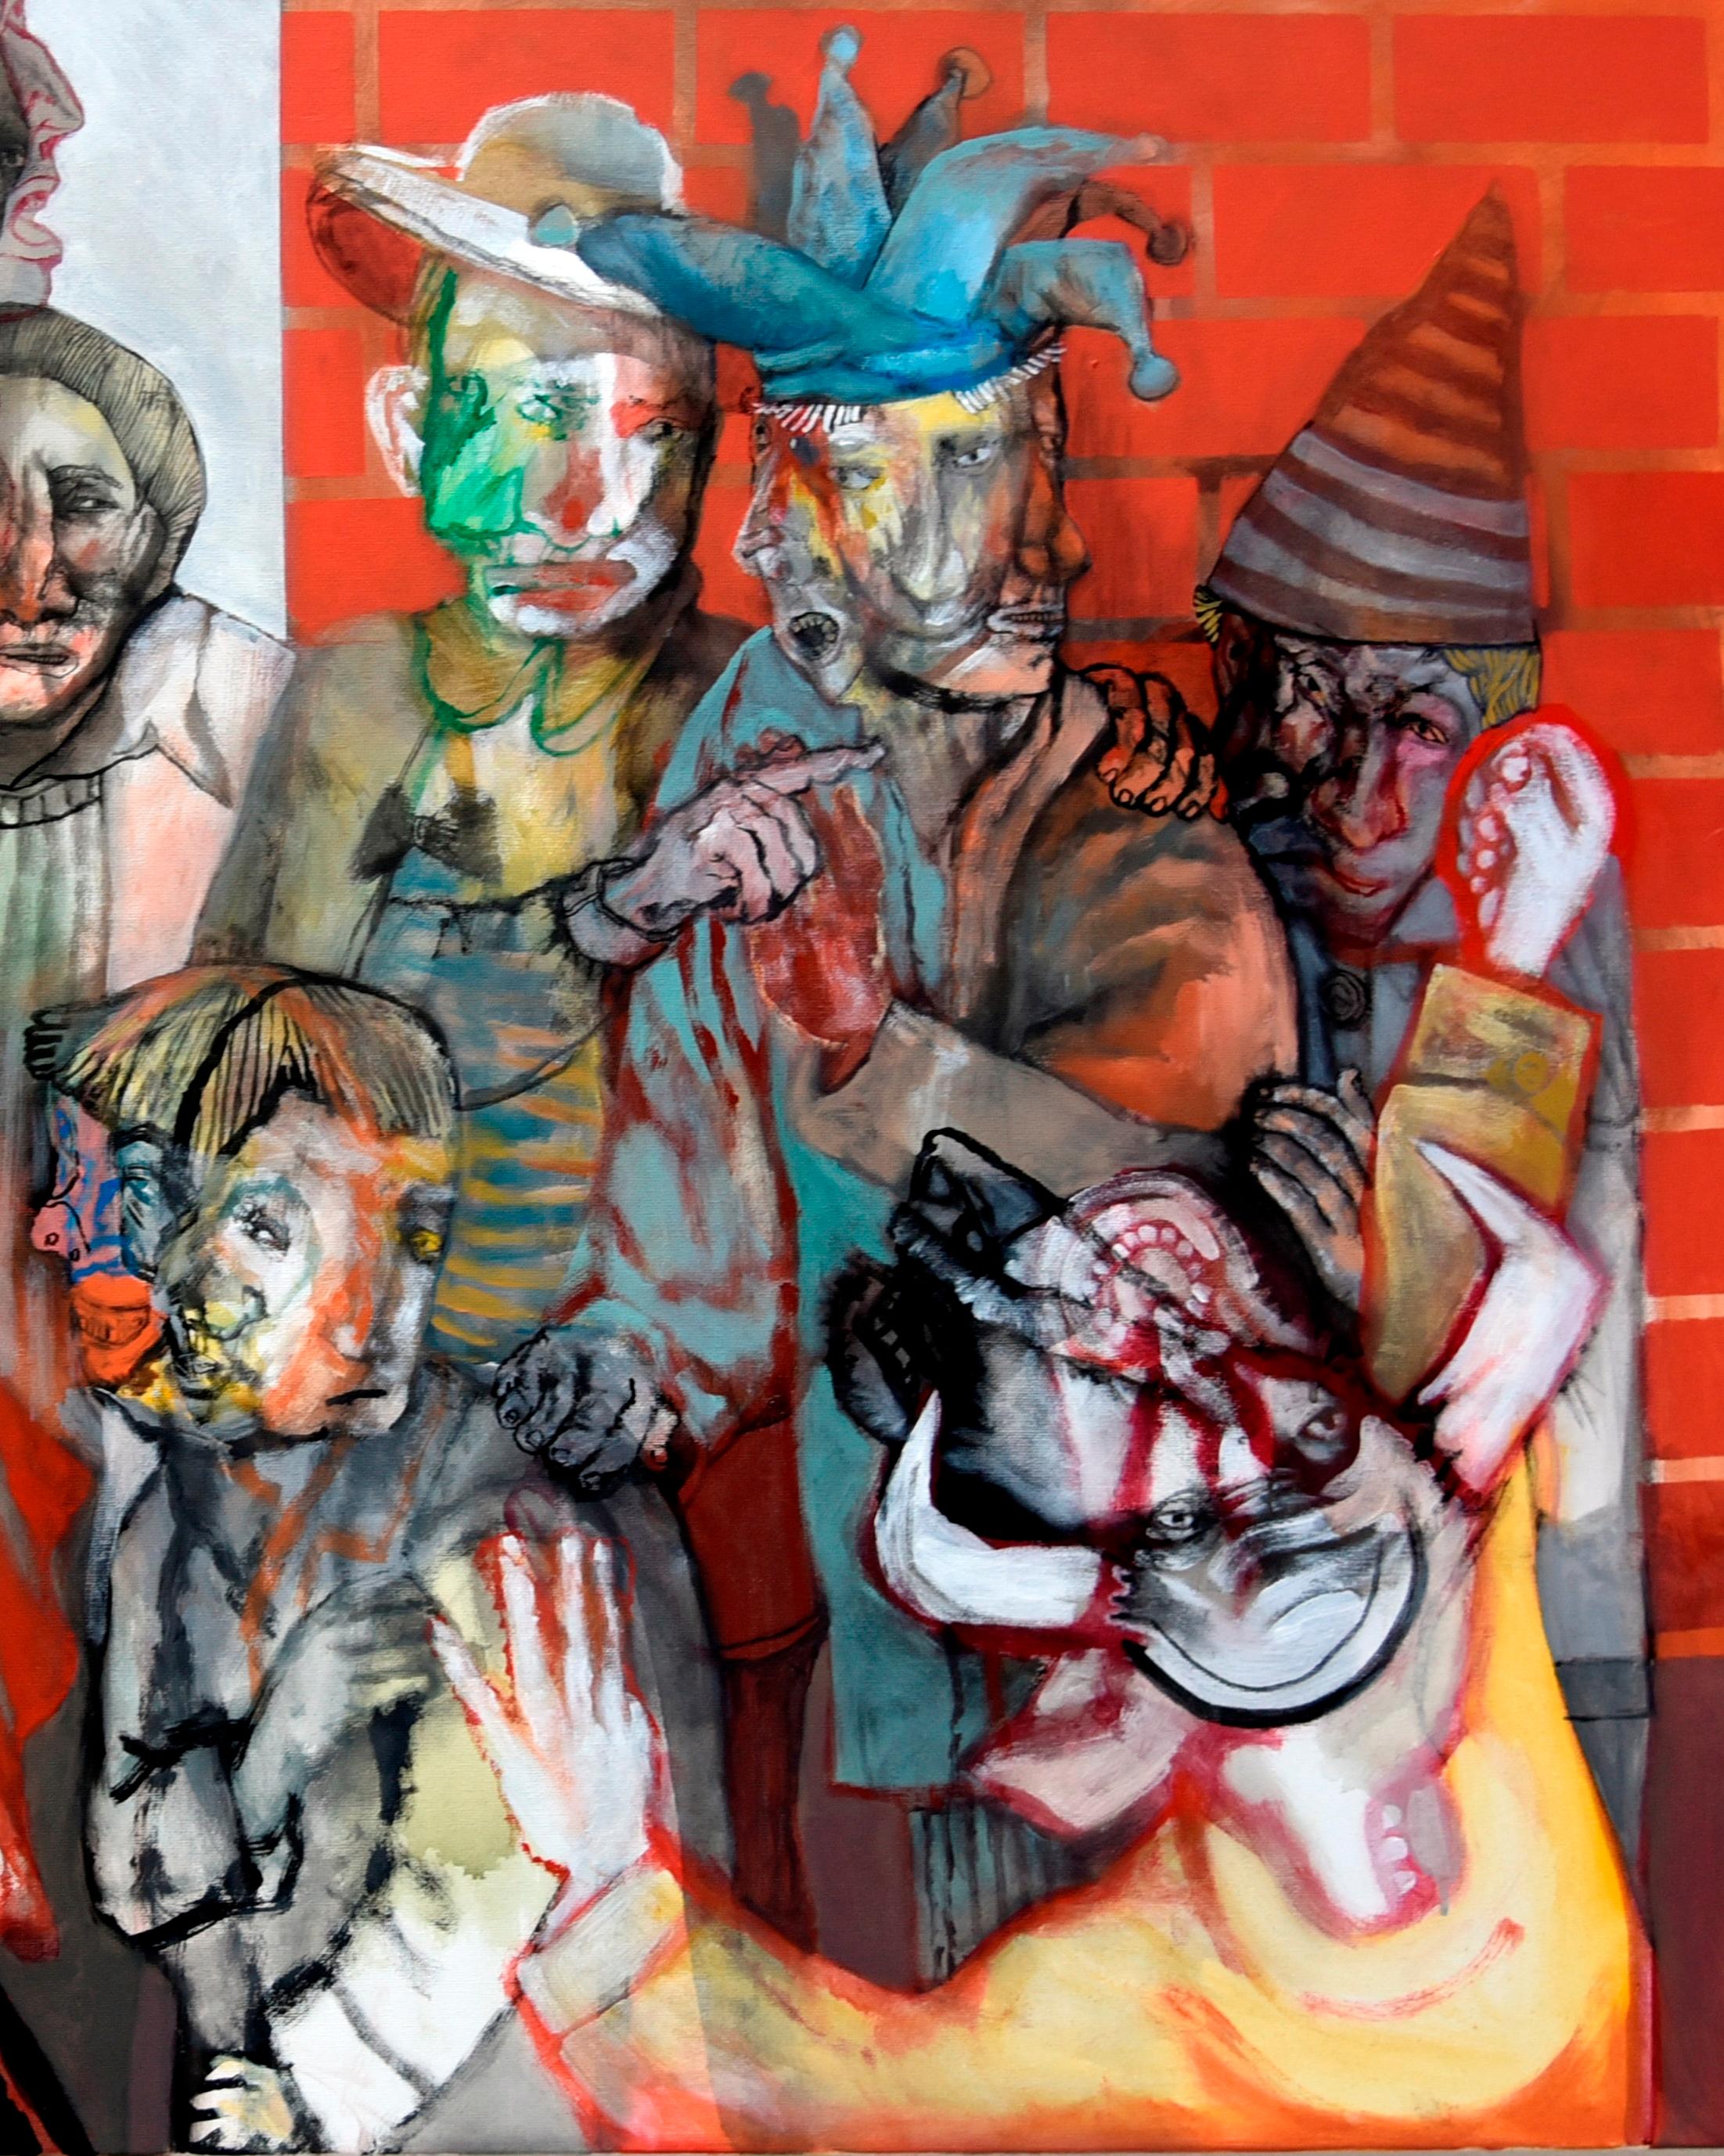 Magic in the streets - Sergio Moscona, 21st Century, Figurative painting 2